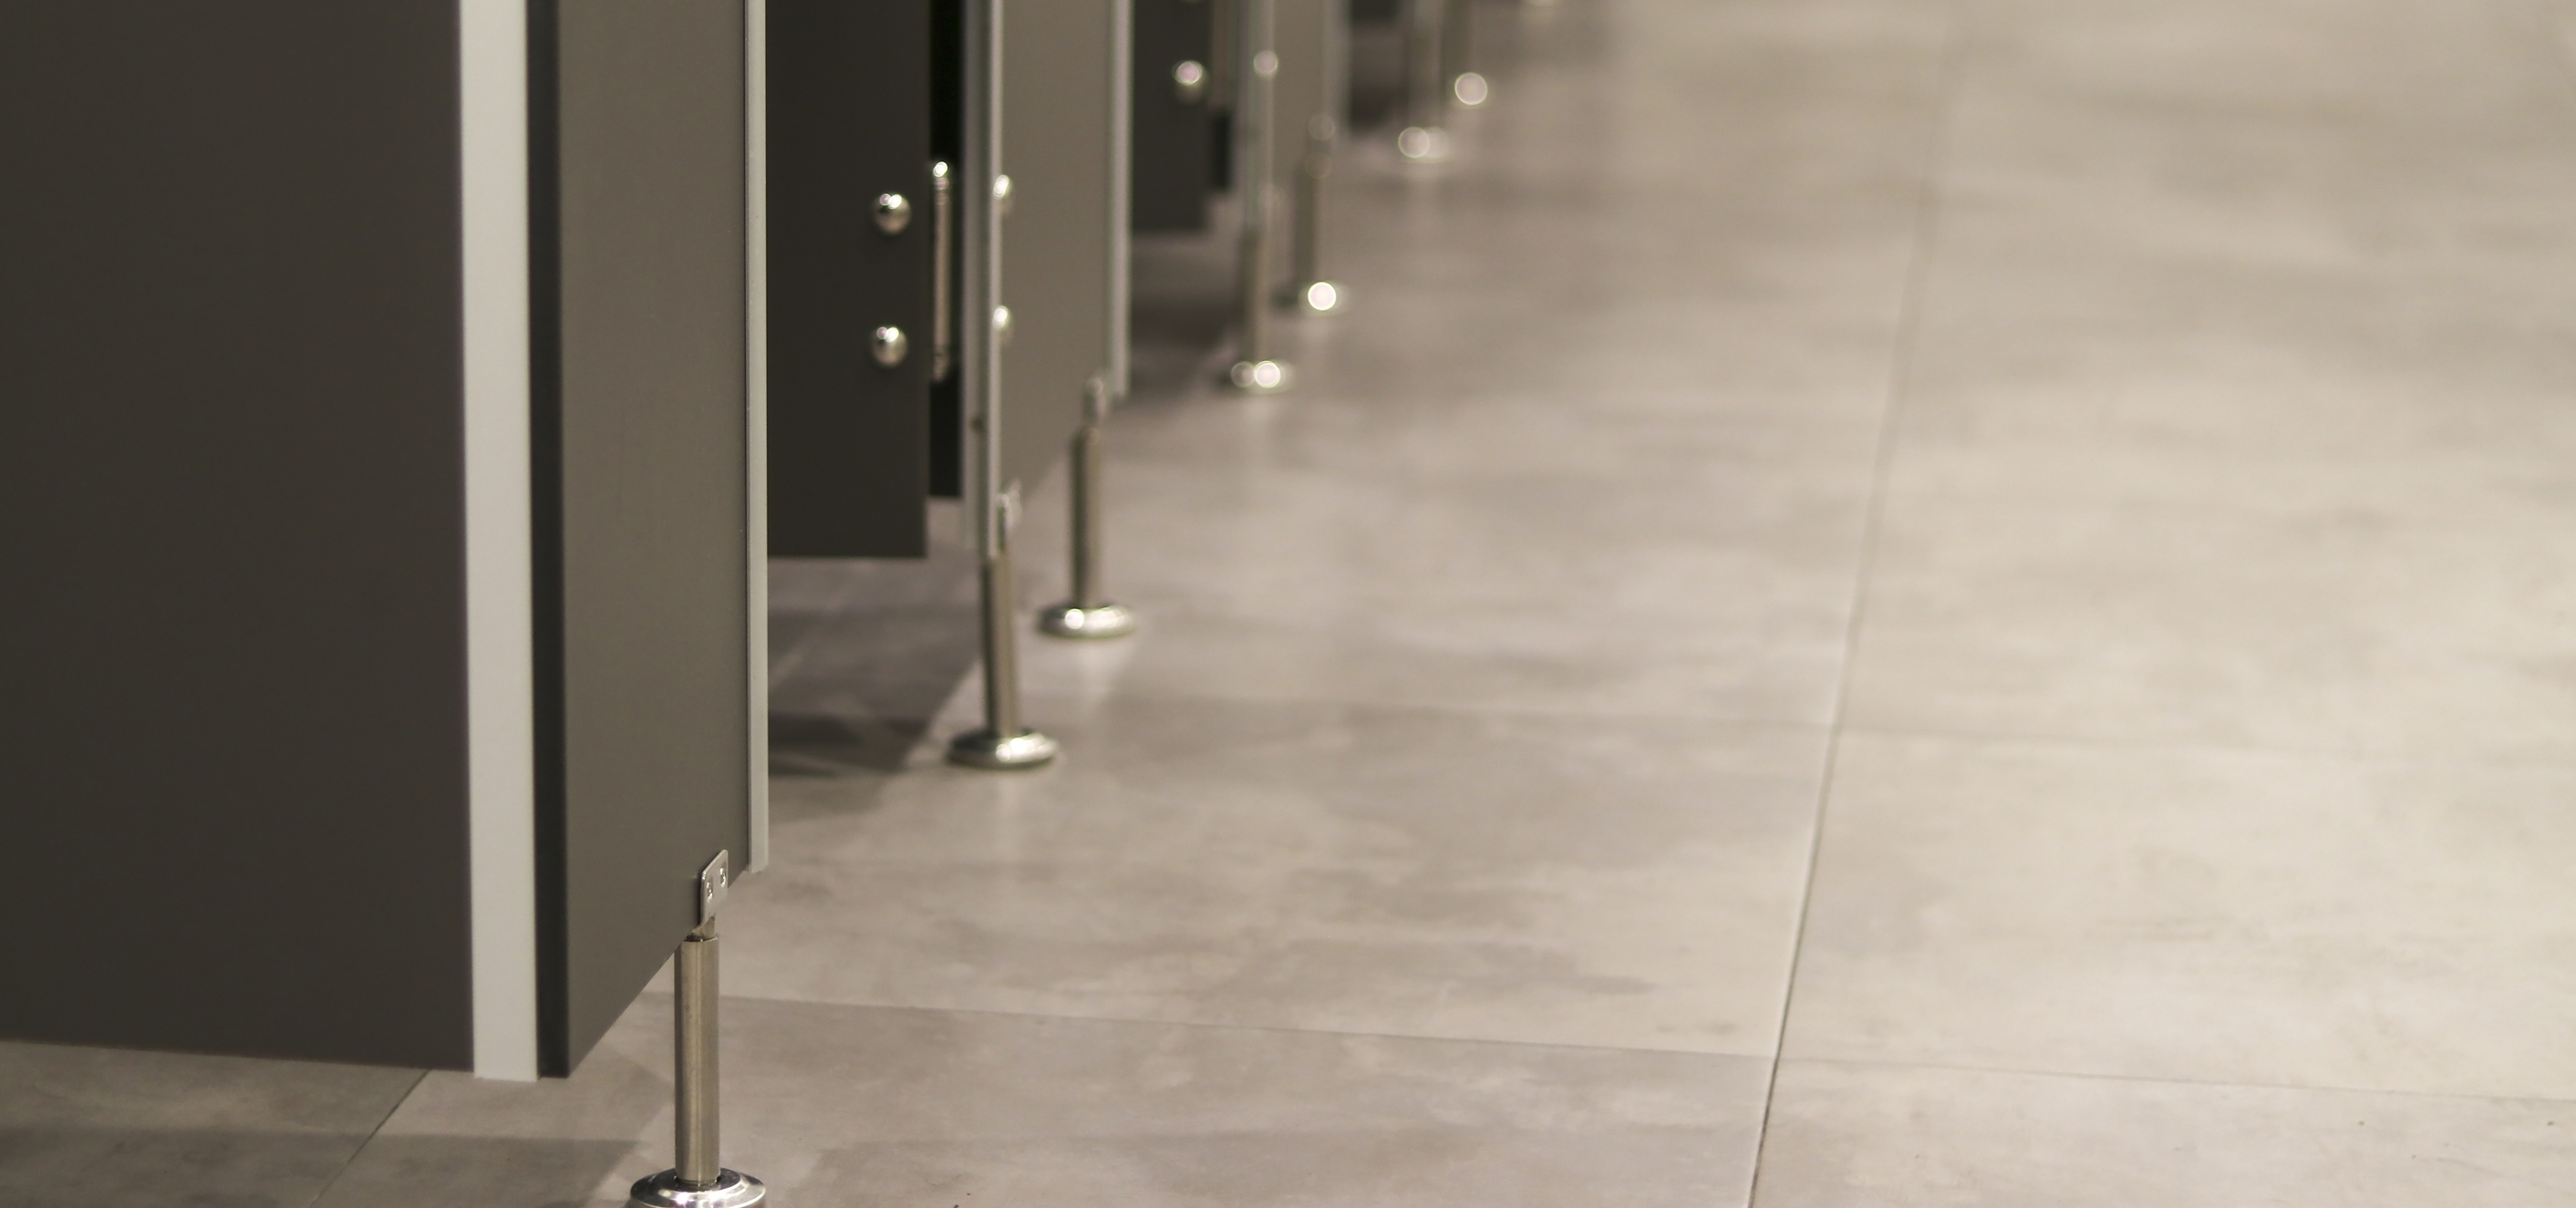 A shot close to the floor of a public bathroom, creating a perspective effect in which hardware for floor-mounted partitions are shown sweeping up from lower left to top center on one side, and the other side is the tile floor upon which they rest.